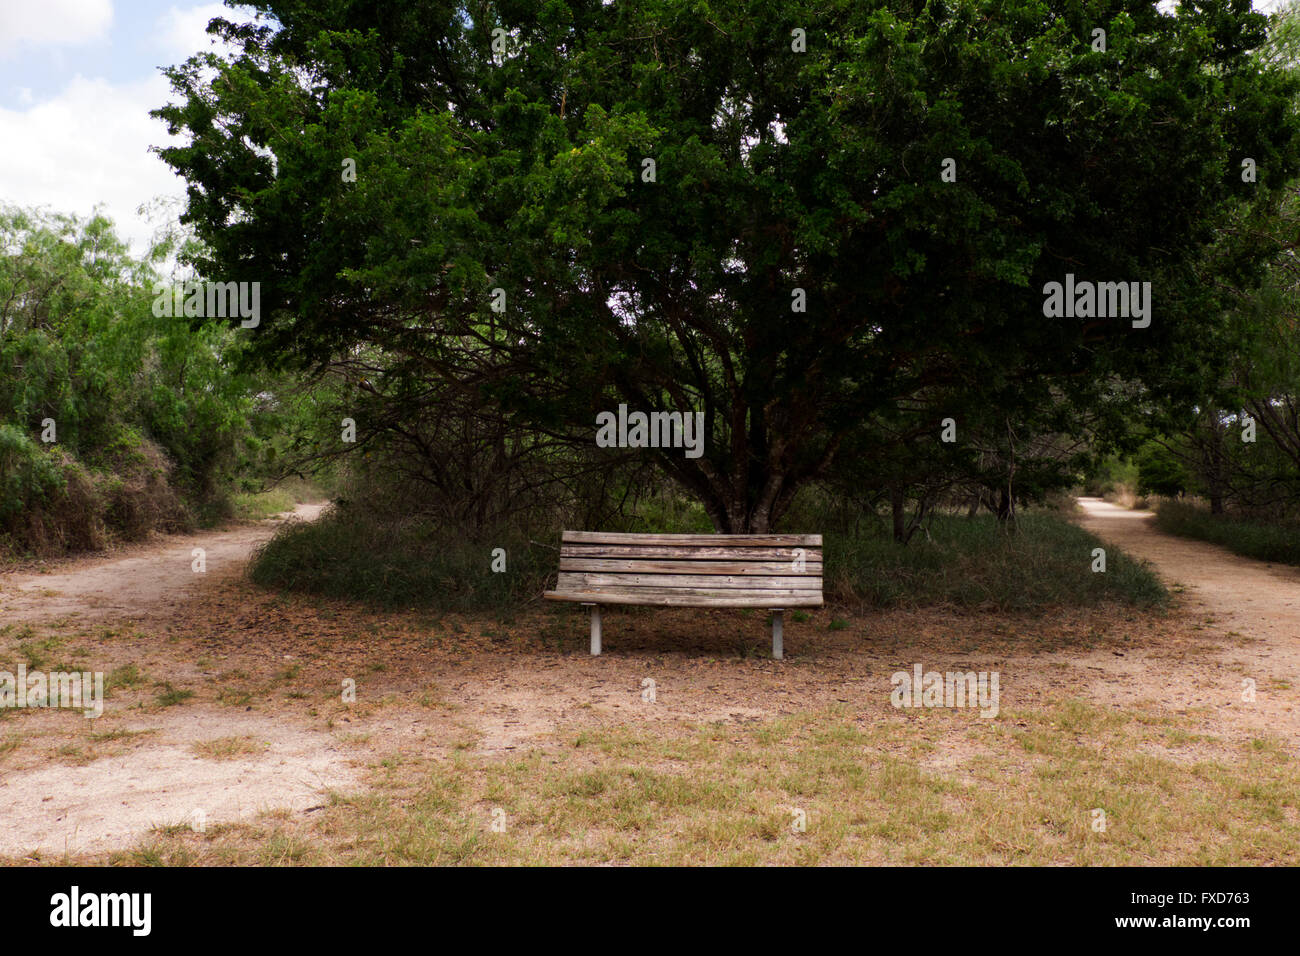 Worn, weathered park bench sits in the shade of an Ebony tree at the junction of  footpaths in the Resaca de La Palma State Park Stock Photo